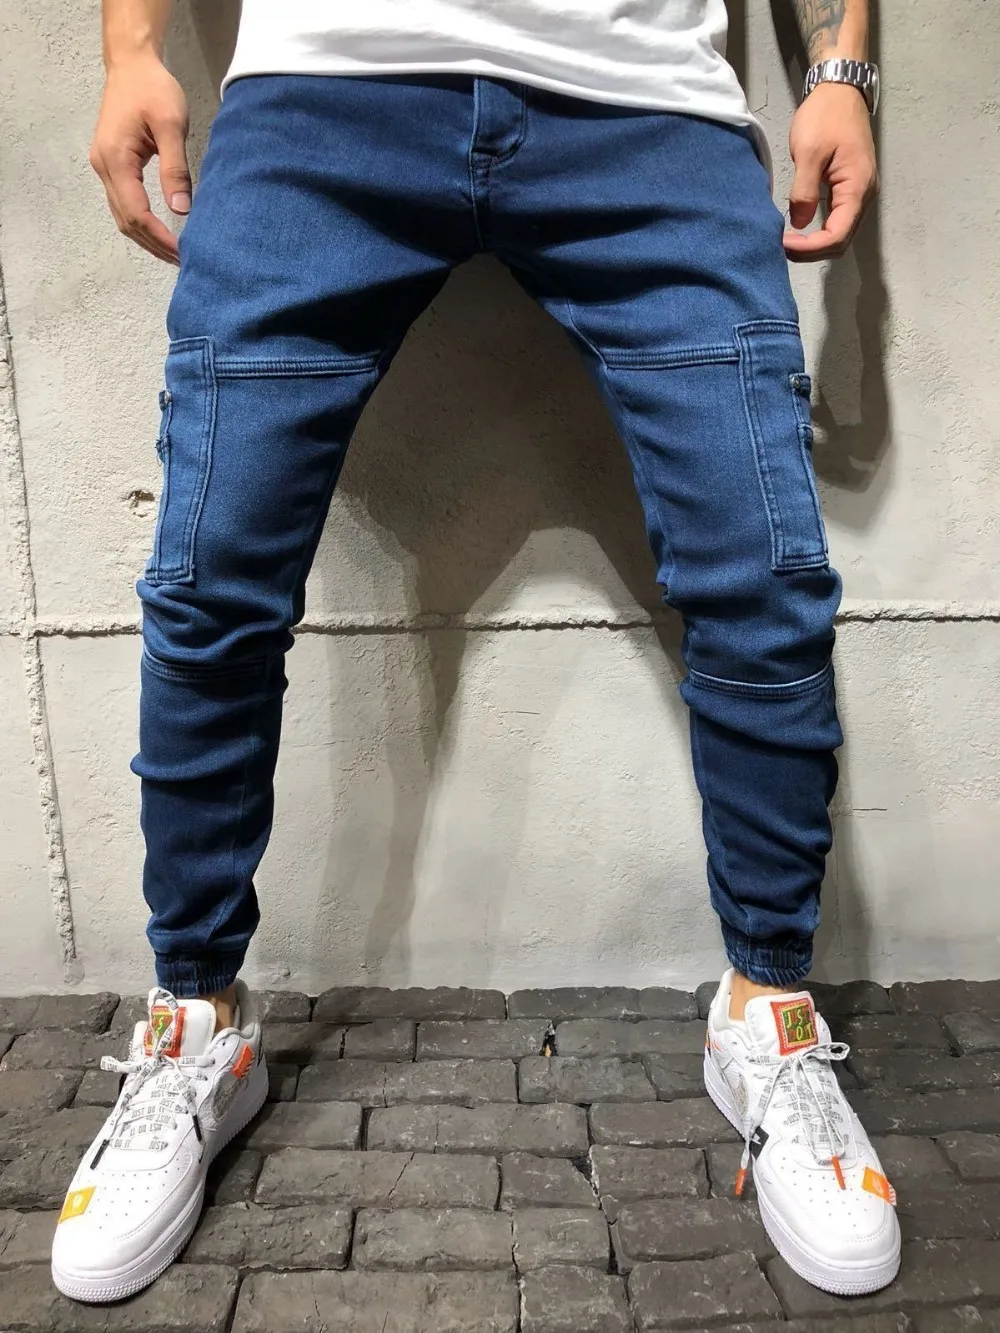 jeans jogger style